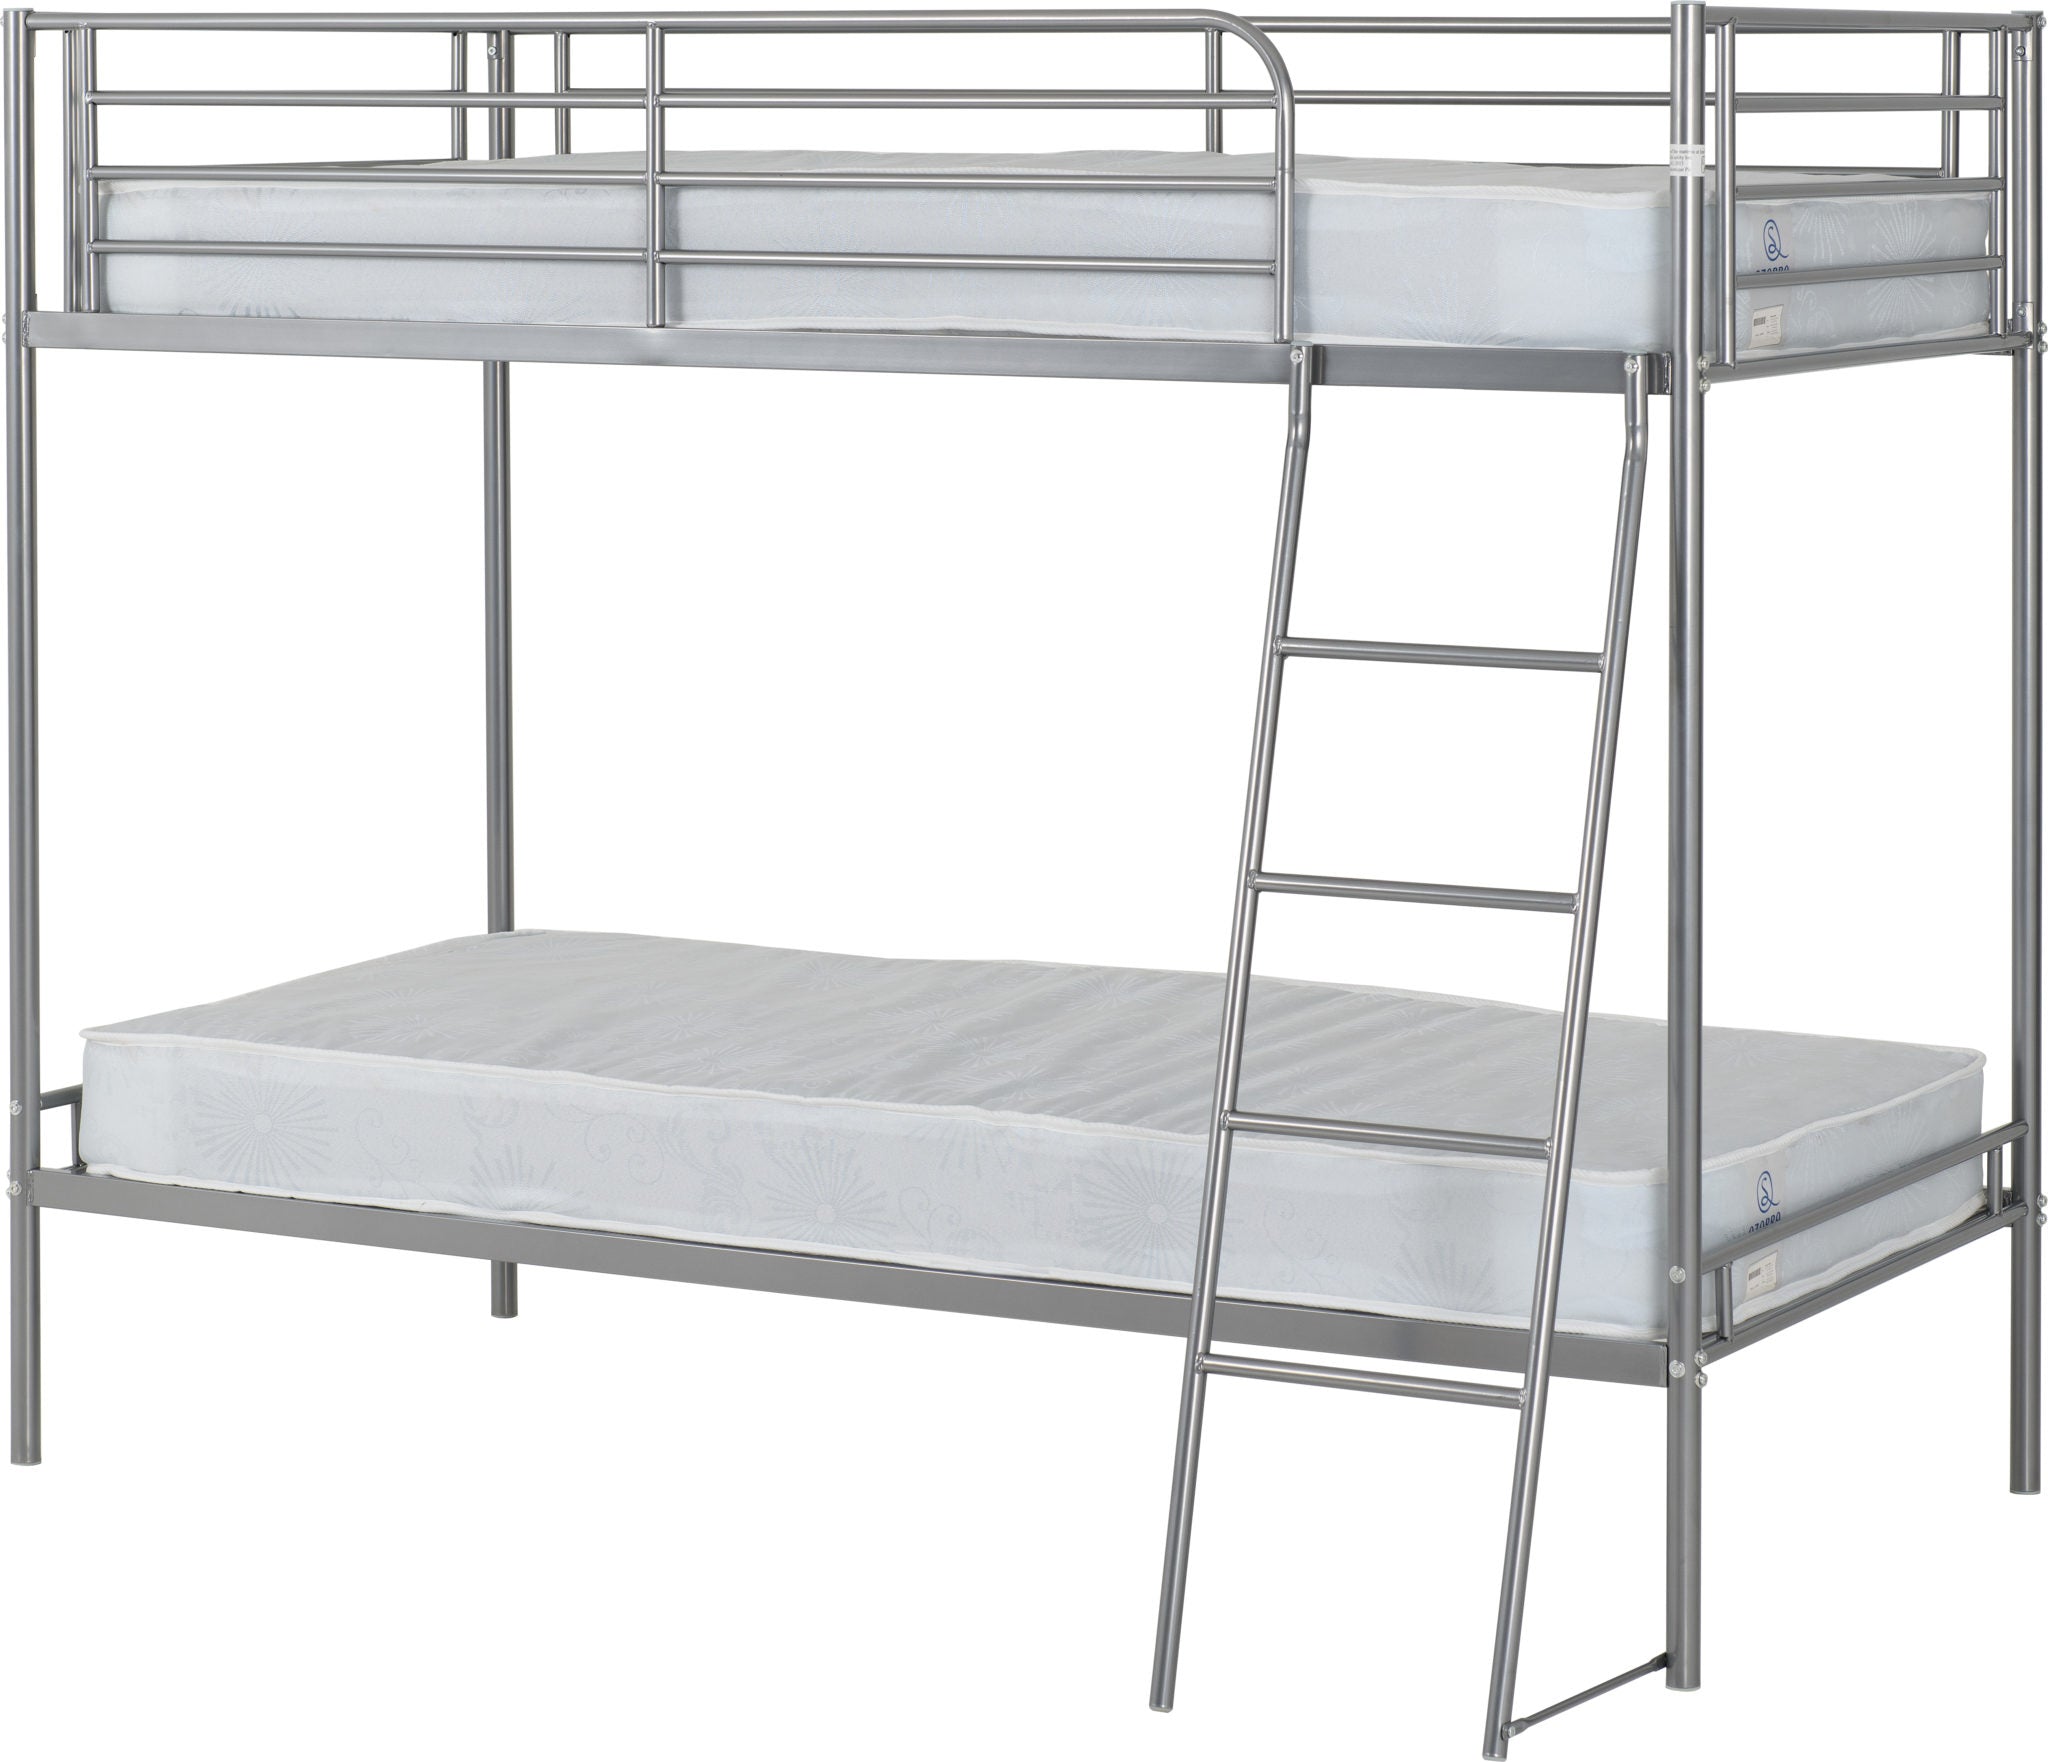 Brandon 3' Bunk Bed Silver- The Right Buy Store